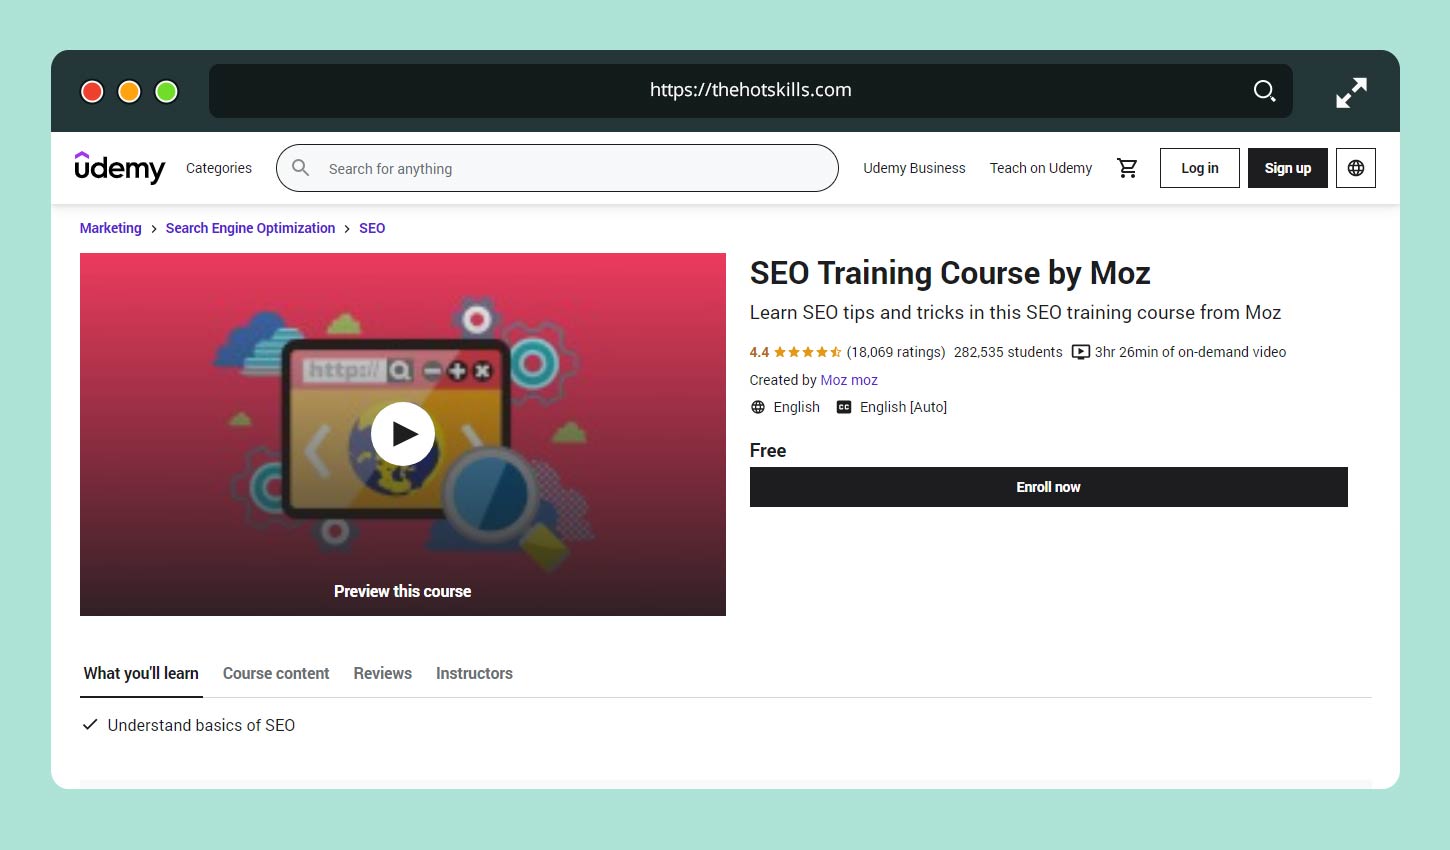 Free SEO Training Course by Moz